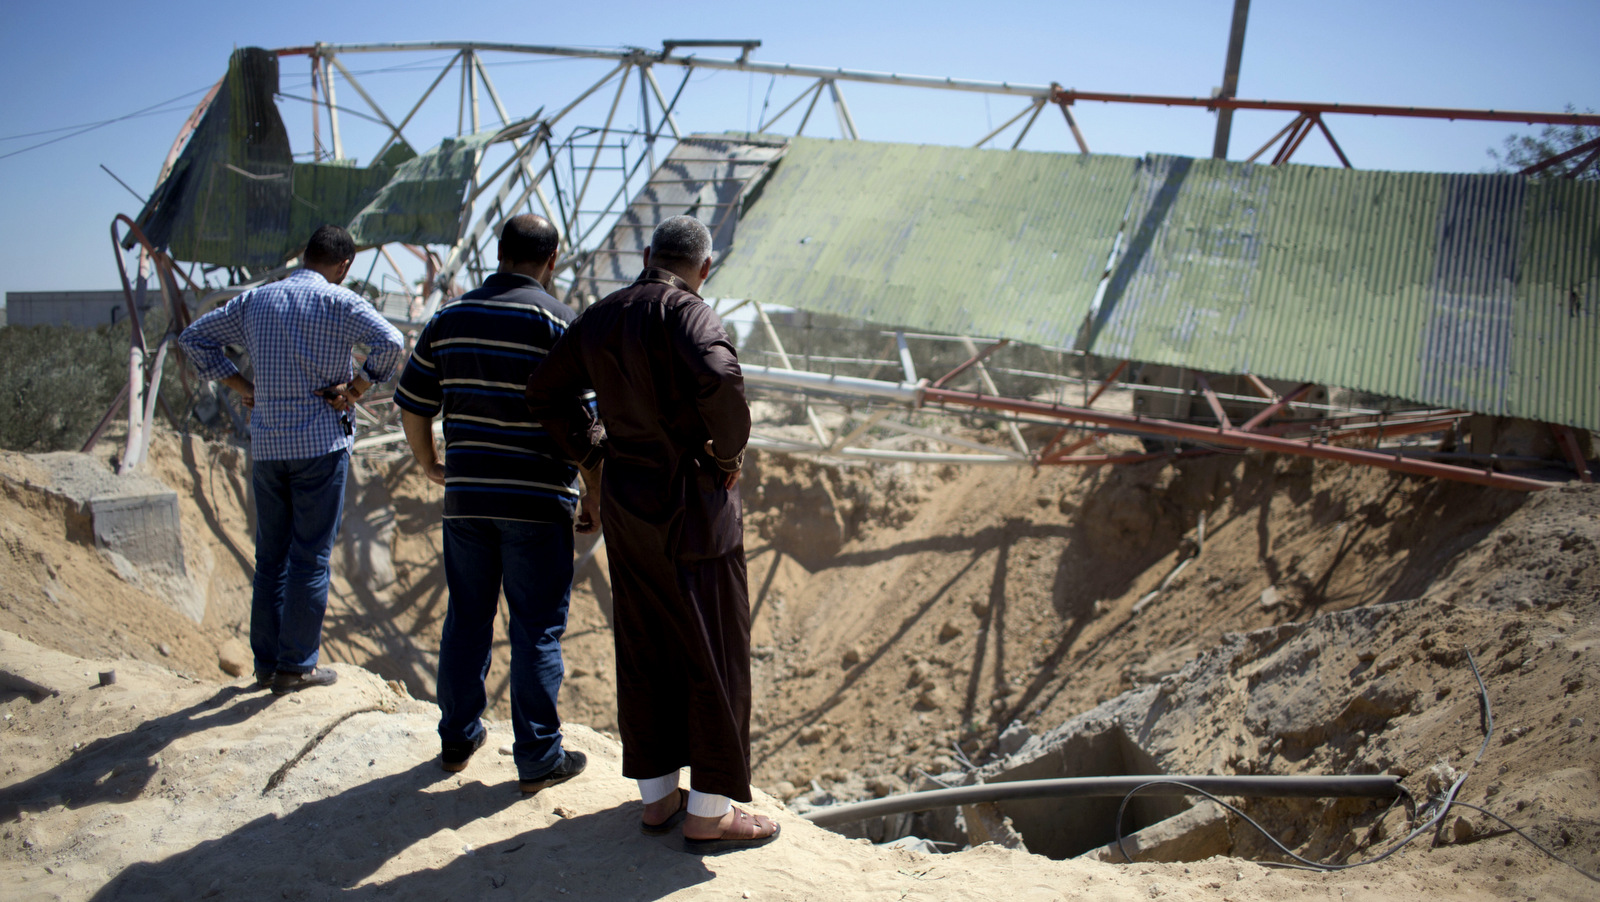 Palestinians look at damage caused by an Israeli airstrike on what the Israeli government claims was a Hamas training camp in Jabaliya, northern Gaza Strip, Saturday, Sept. 19, 2015. (AP Photo/ Khalil Hamra)